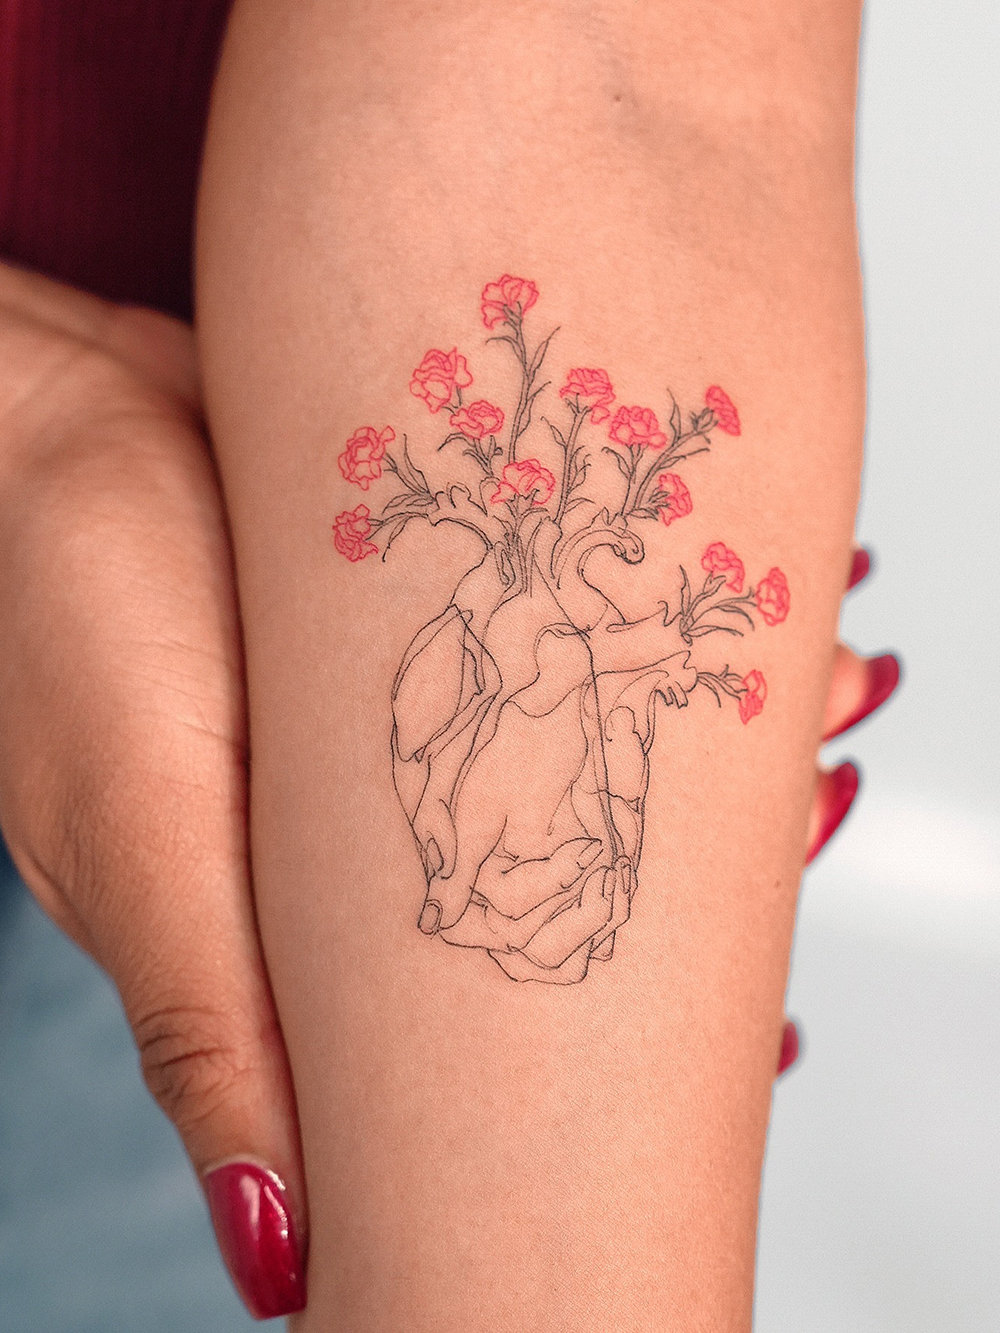 Heart tattoos made up of hands and flowers